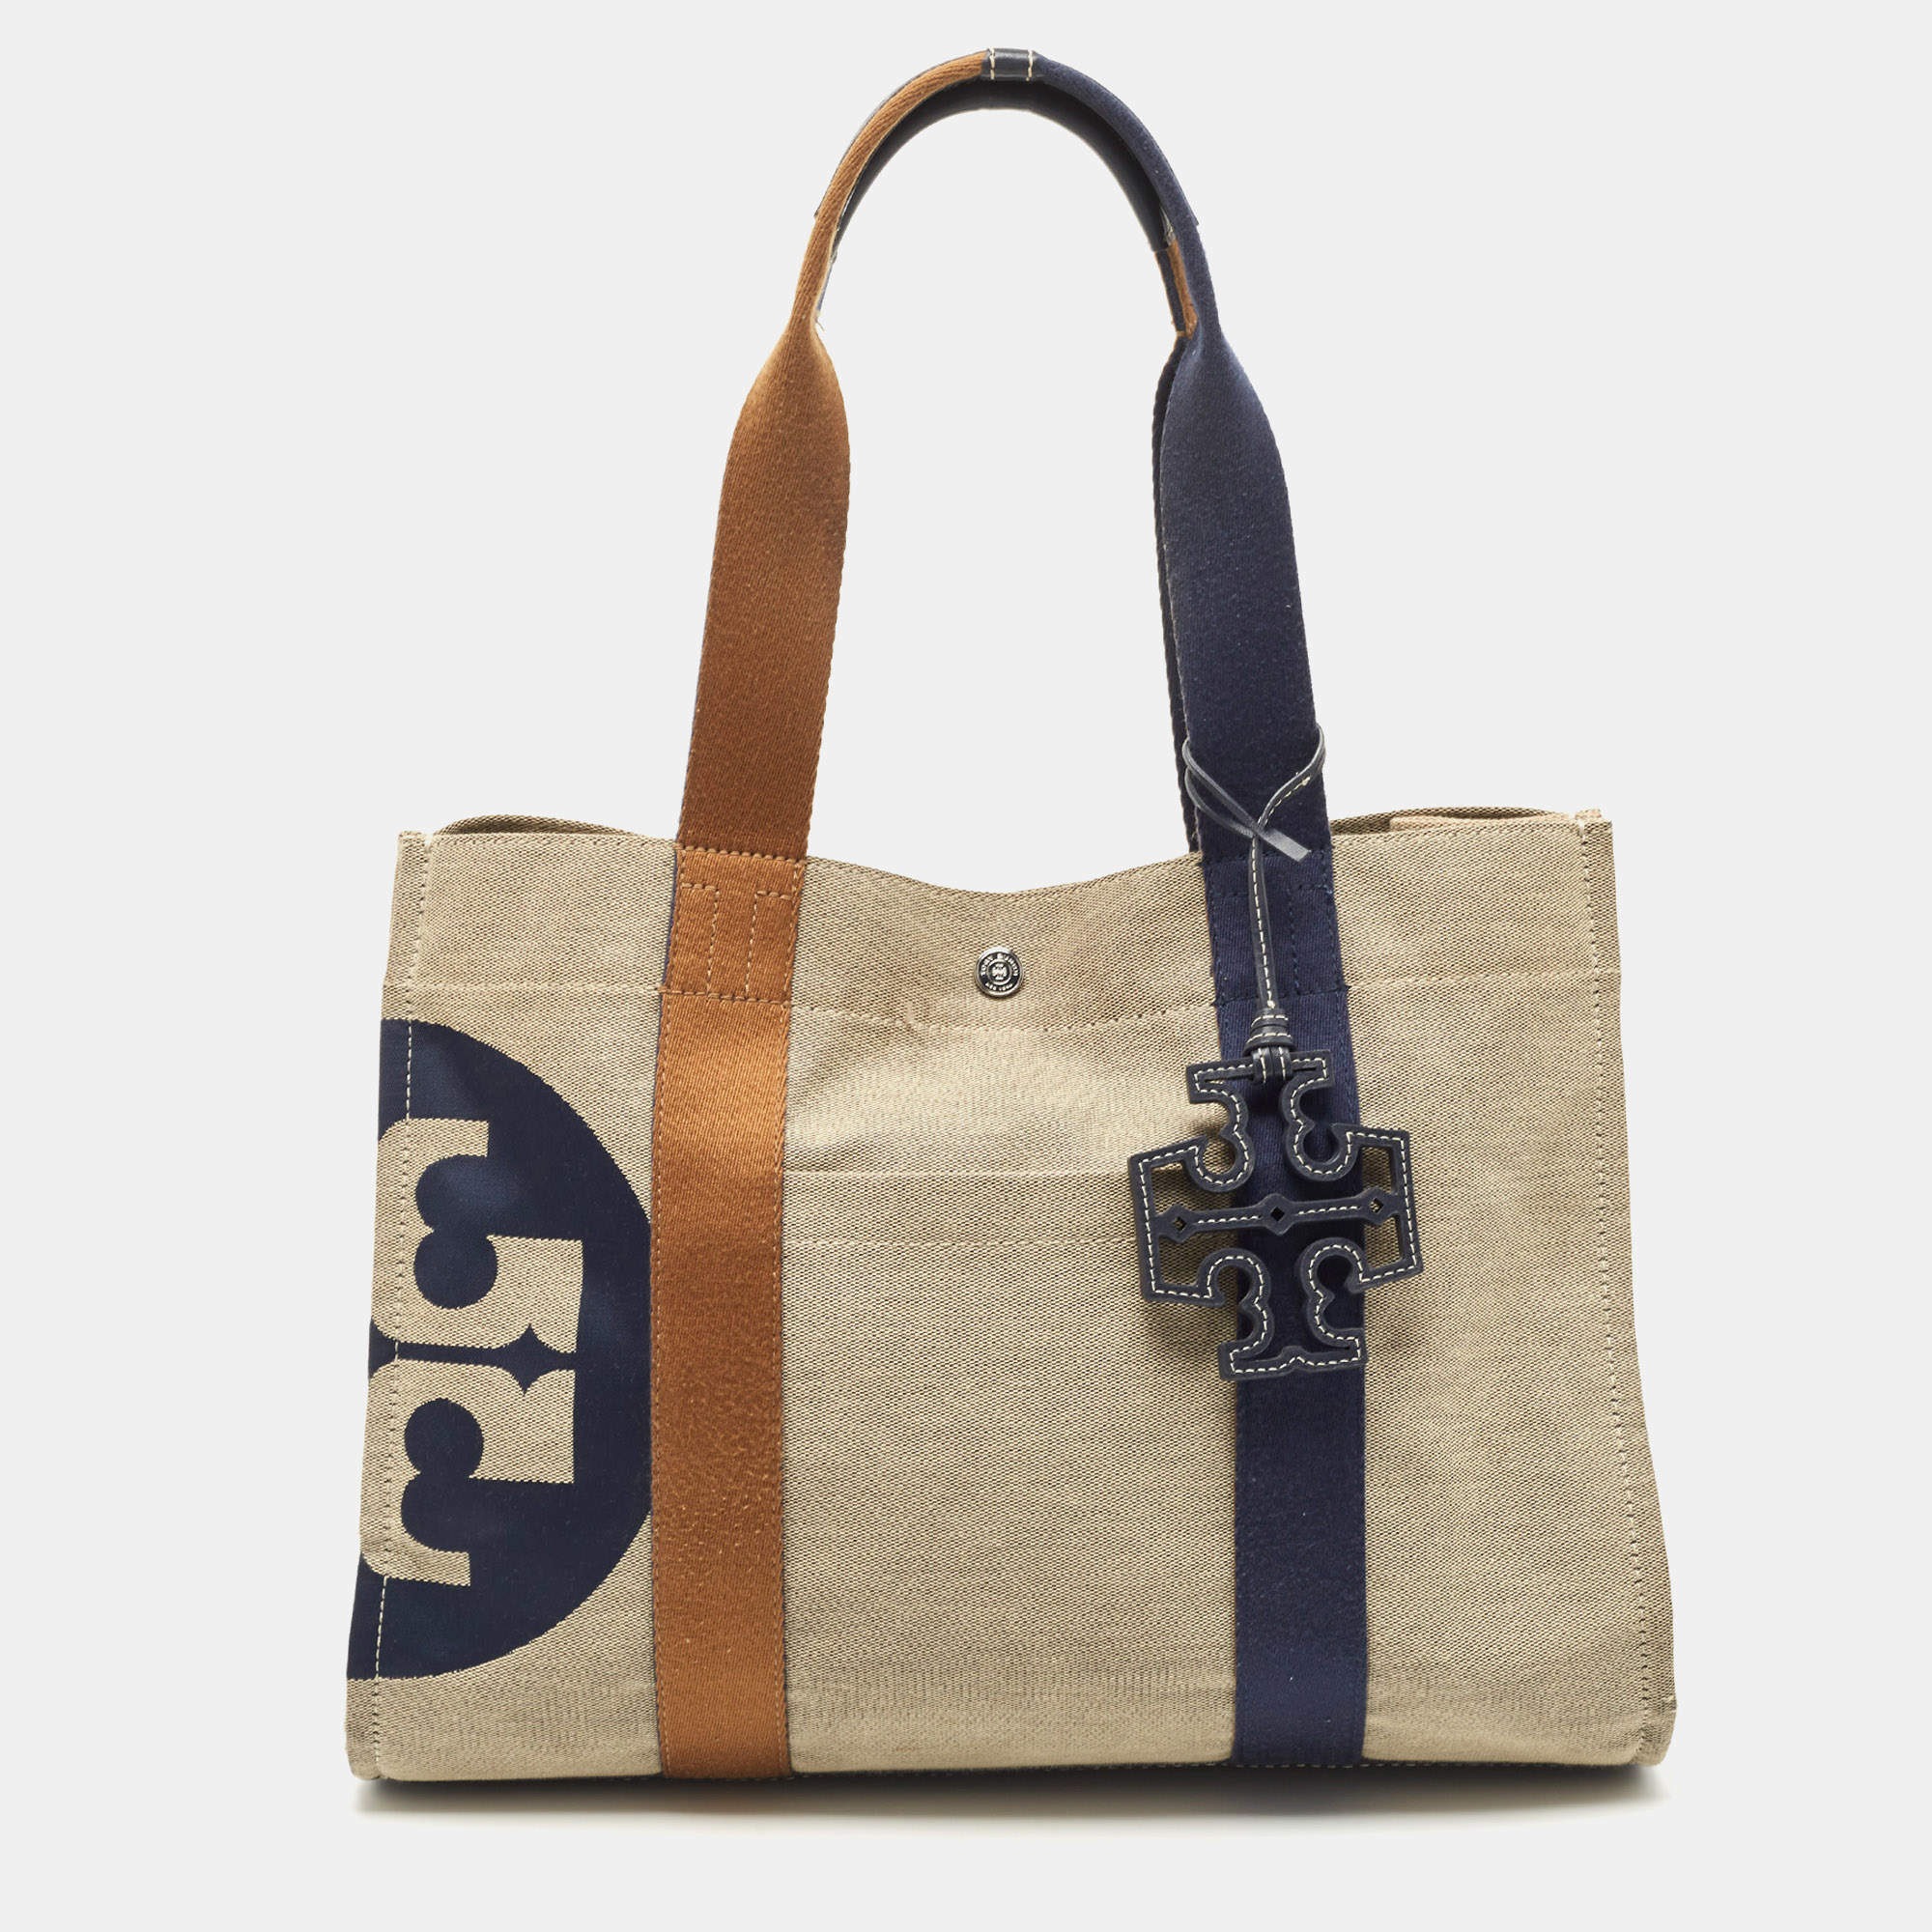 Tory Burch Tri Color Canvas and Leather Shopper Tote Tory Burch | The ...